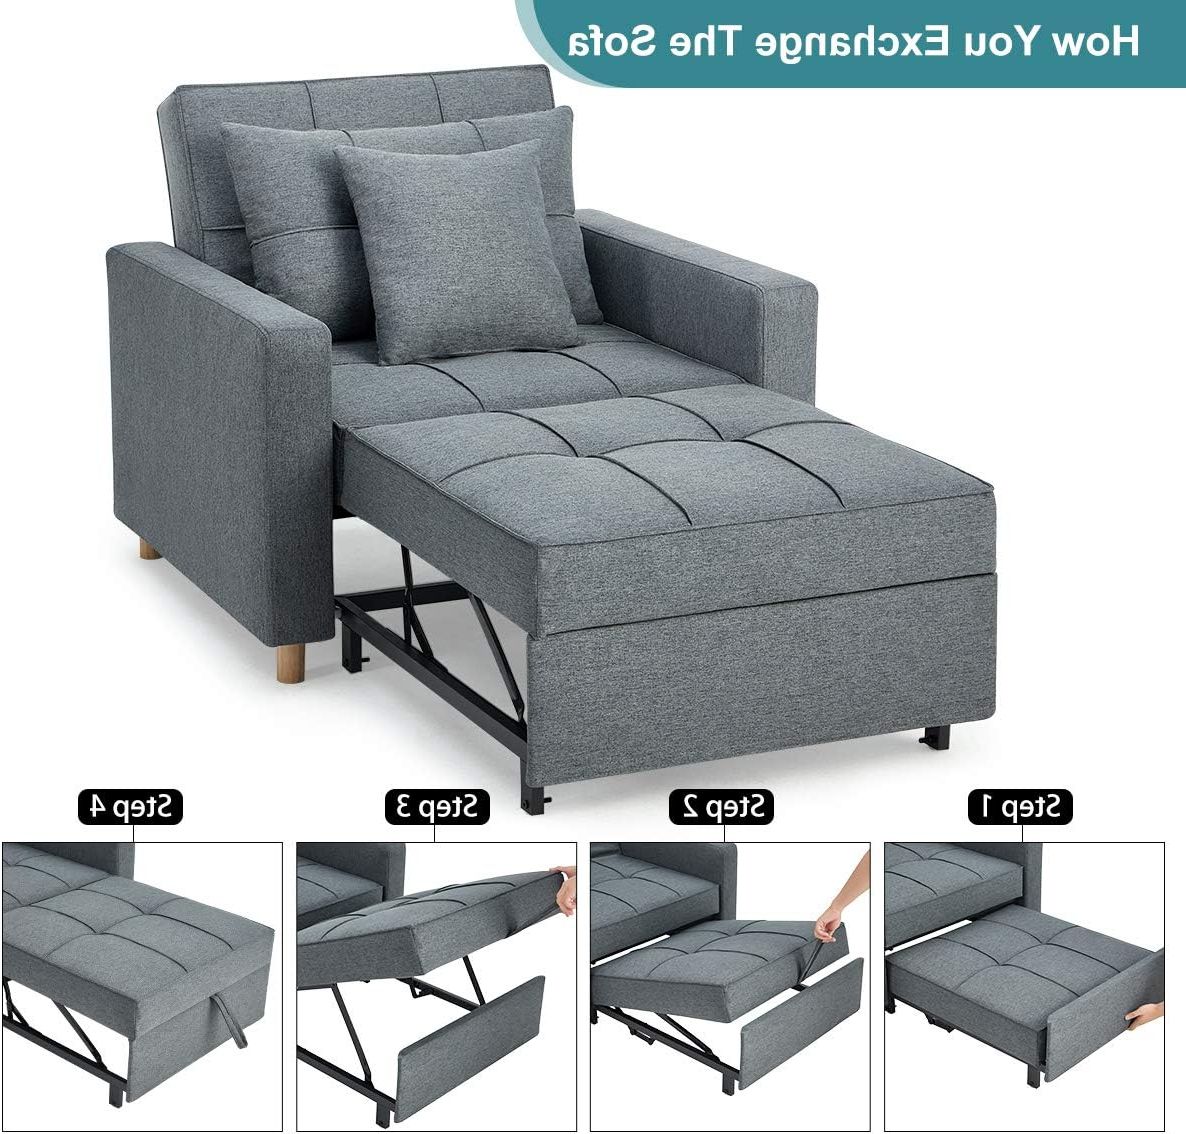 Most Recently Released Buy Esright Convertible Chair Bed 3 In 1, Sleeper Chair Bed, Multi In Convertible Light Gray Chair Beds (View 15 of 15)